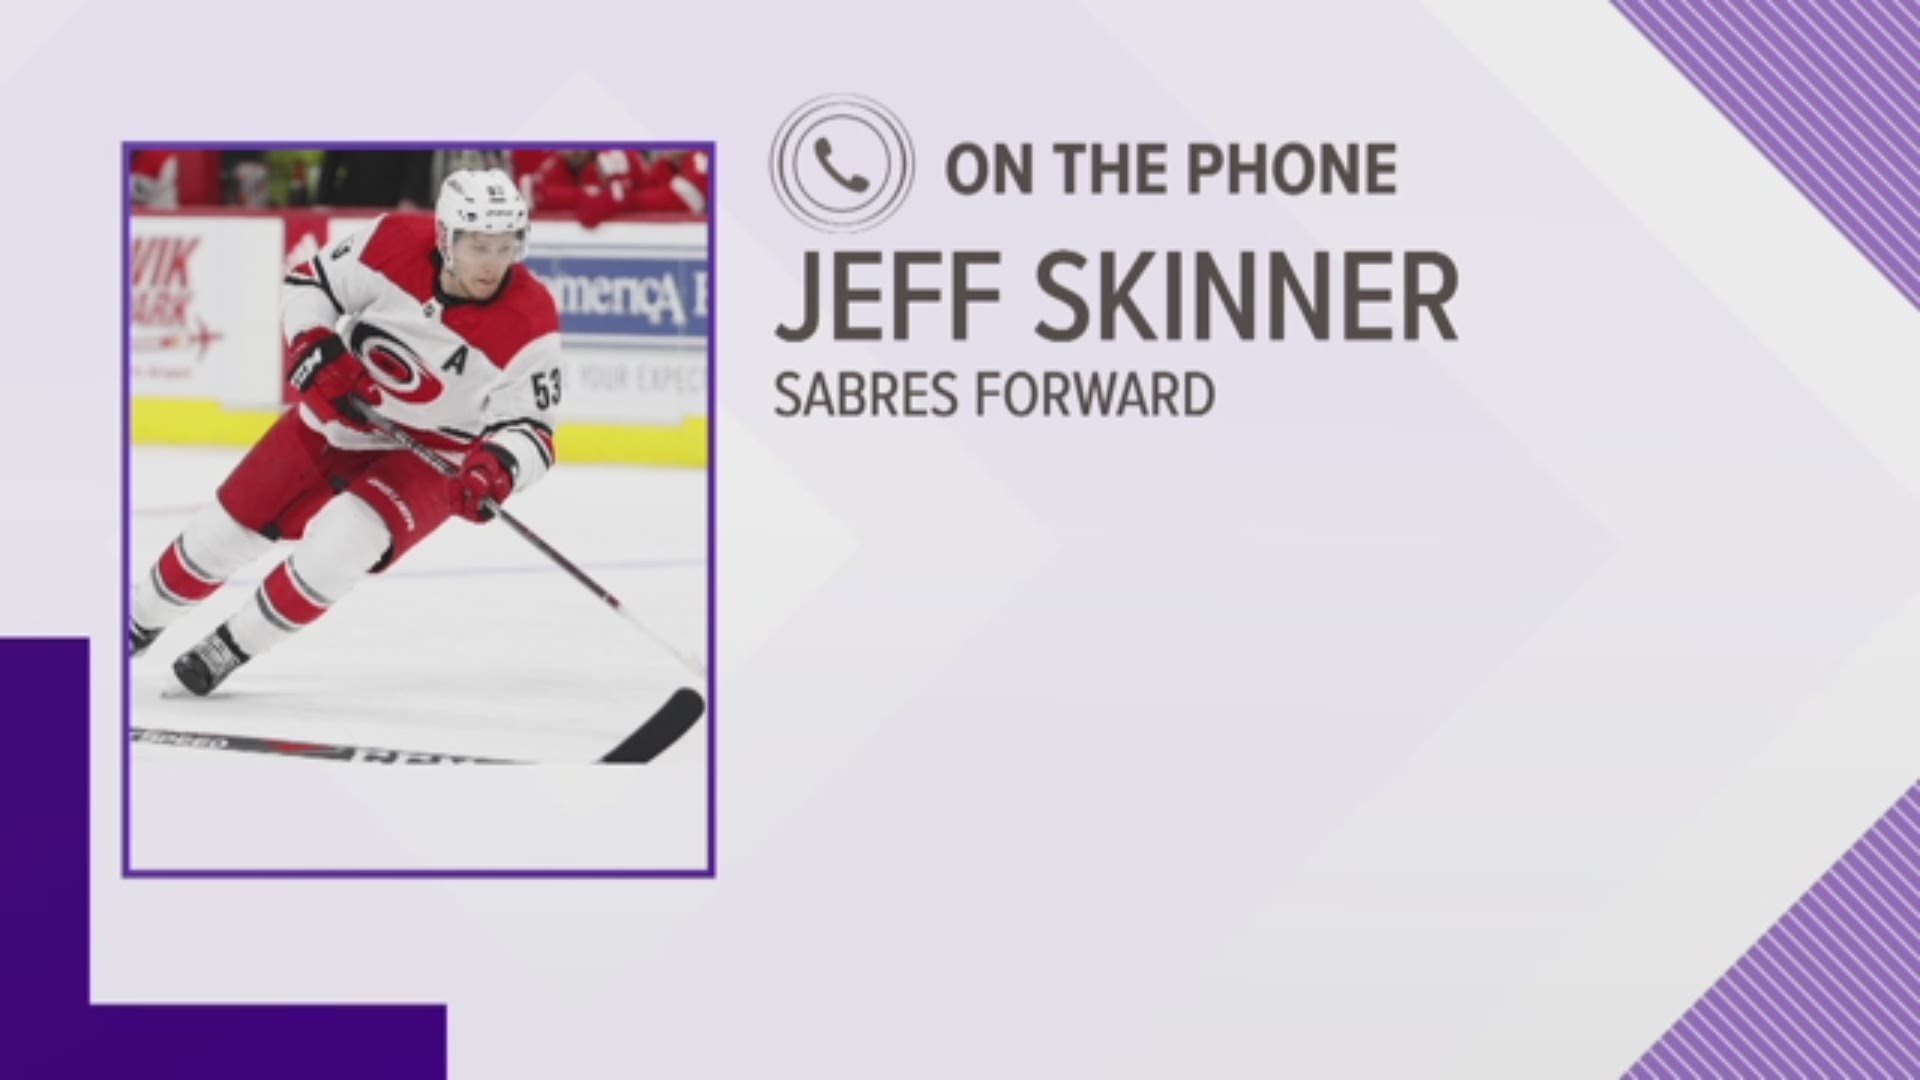 Jeff Skinner is excited to join the Sabres and play with their young players including Jack Eichel.